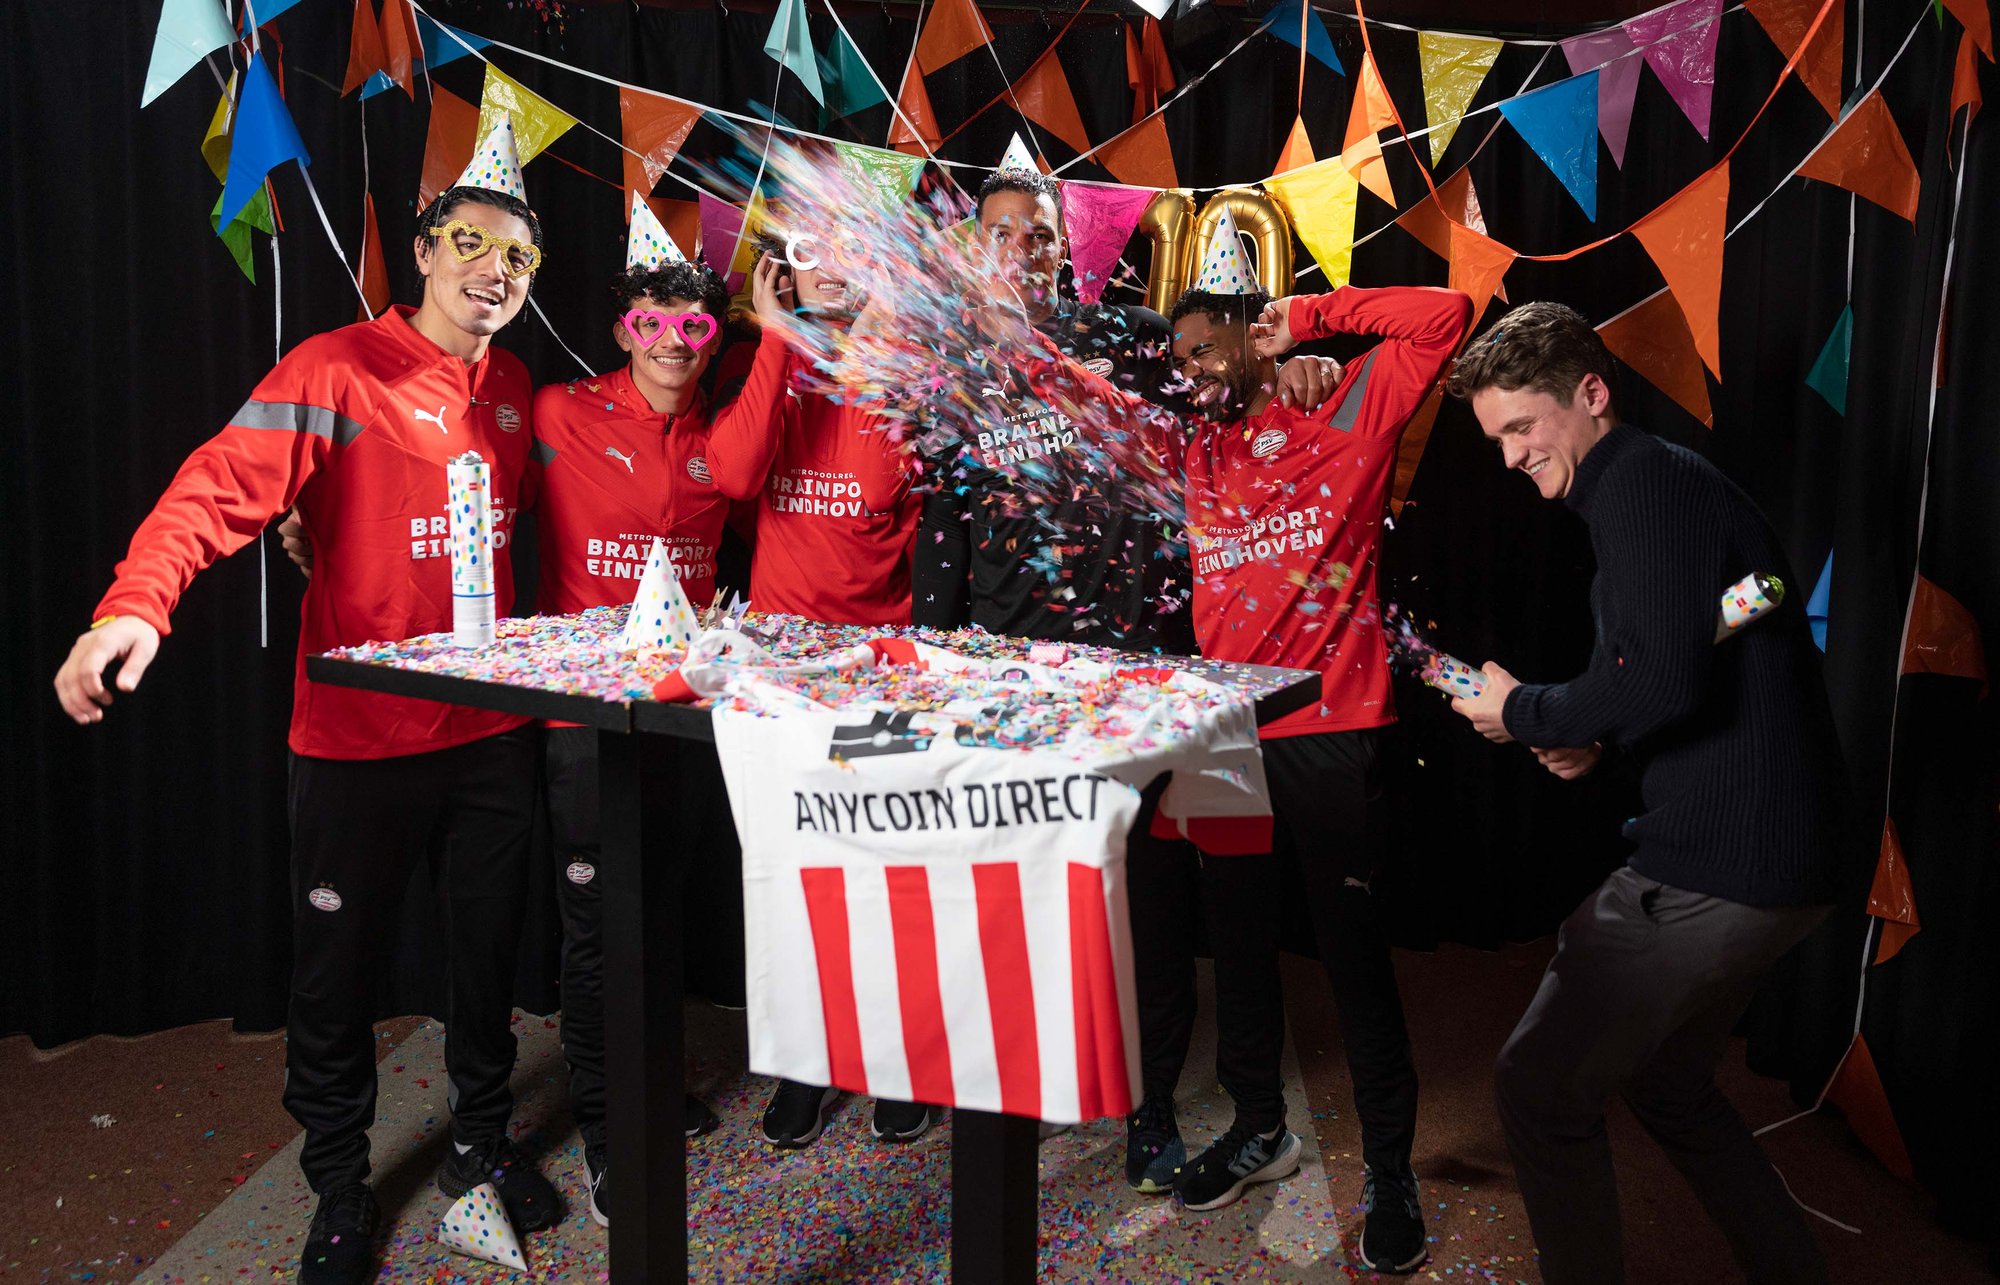 Players PSV celebrate 10-year anniversary Anycoin Direct at videoshoot